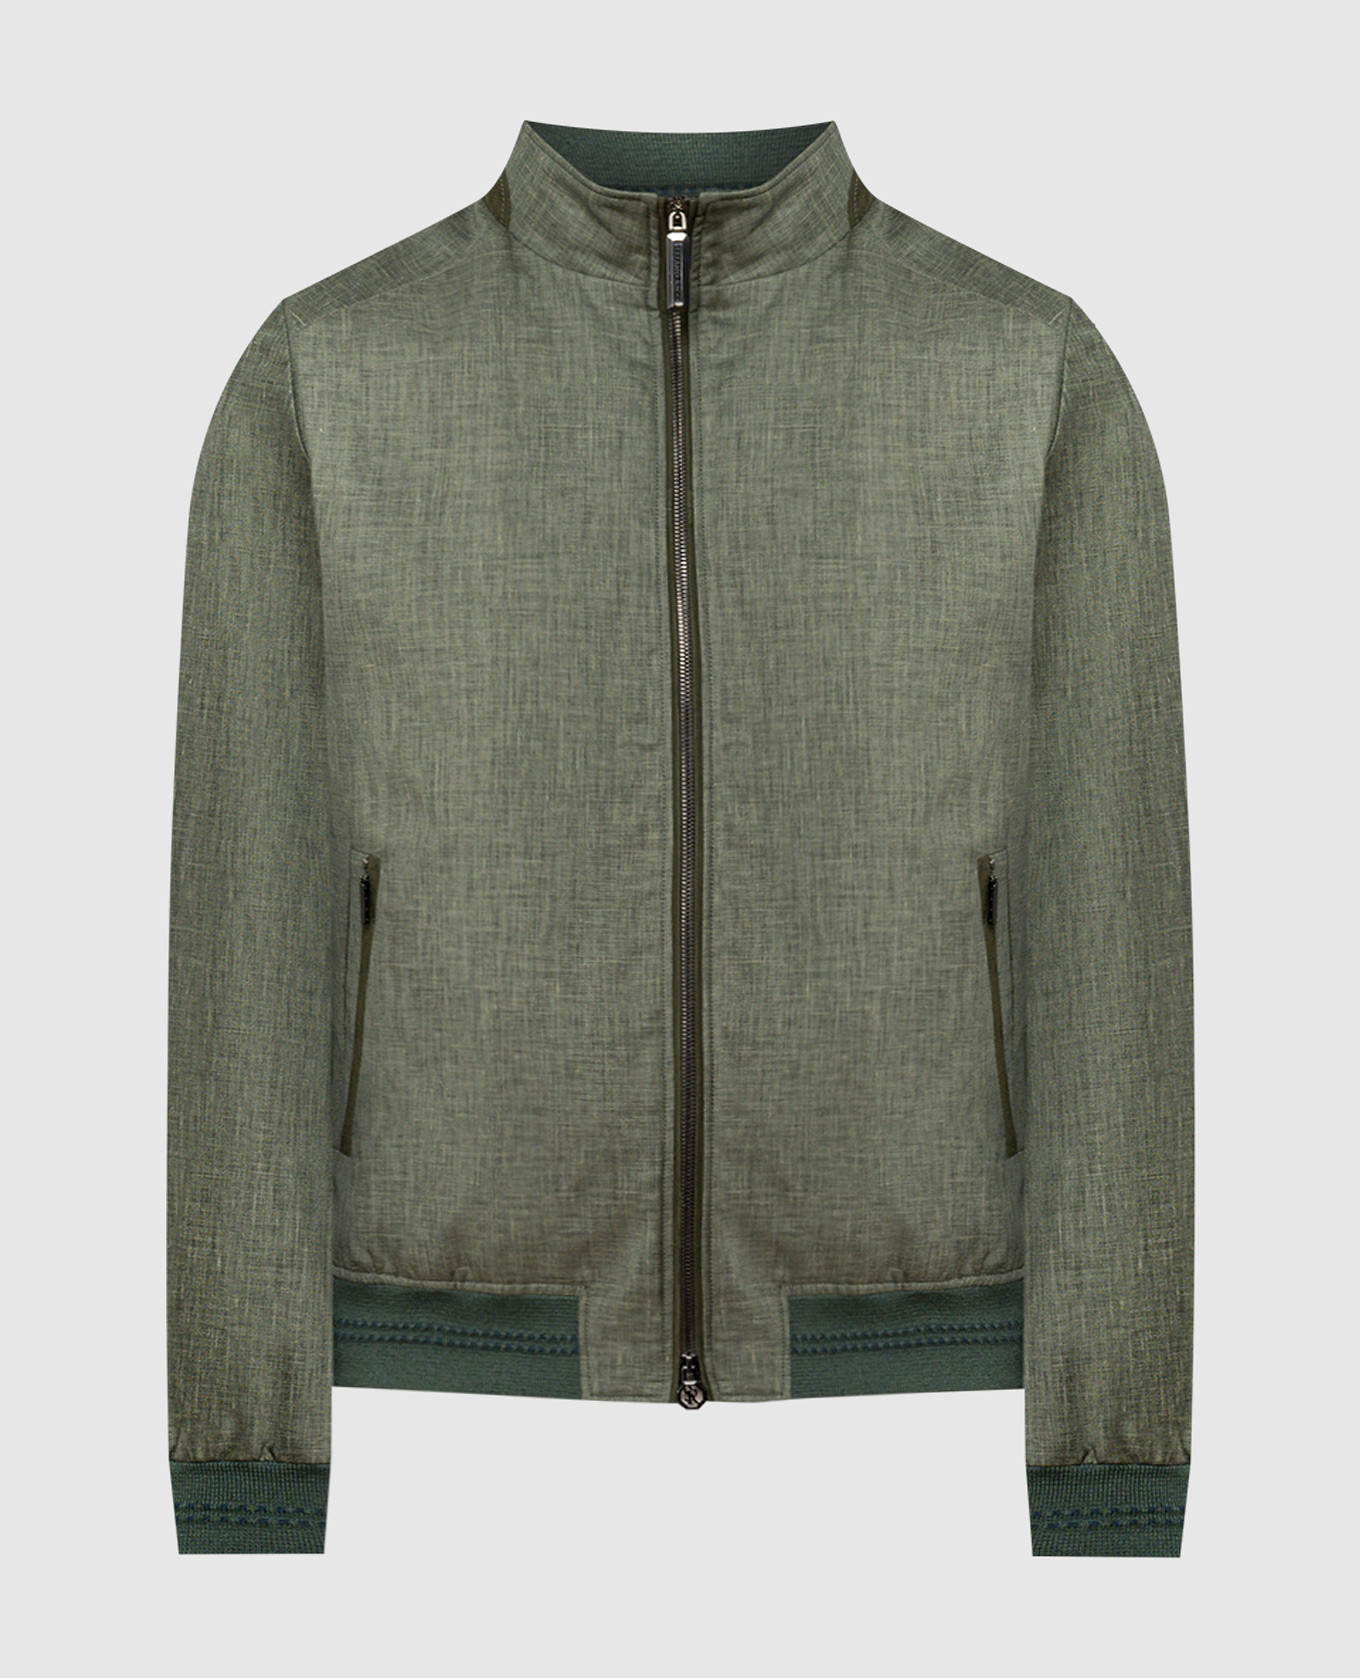 Green jacket made of linen, wool and silk with leather inserts